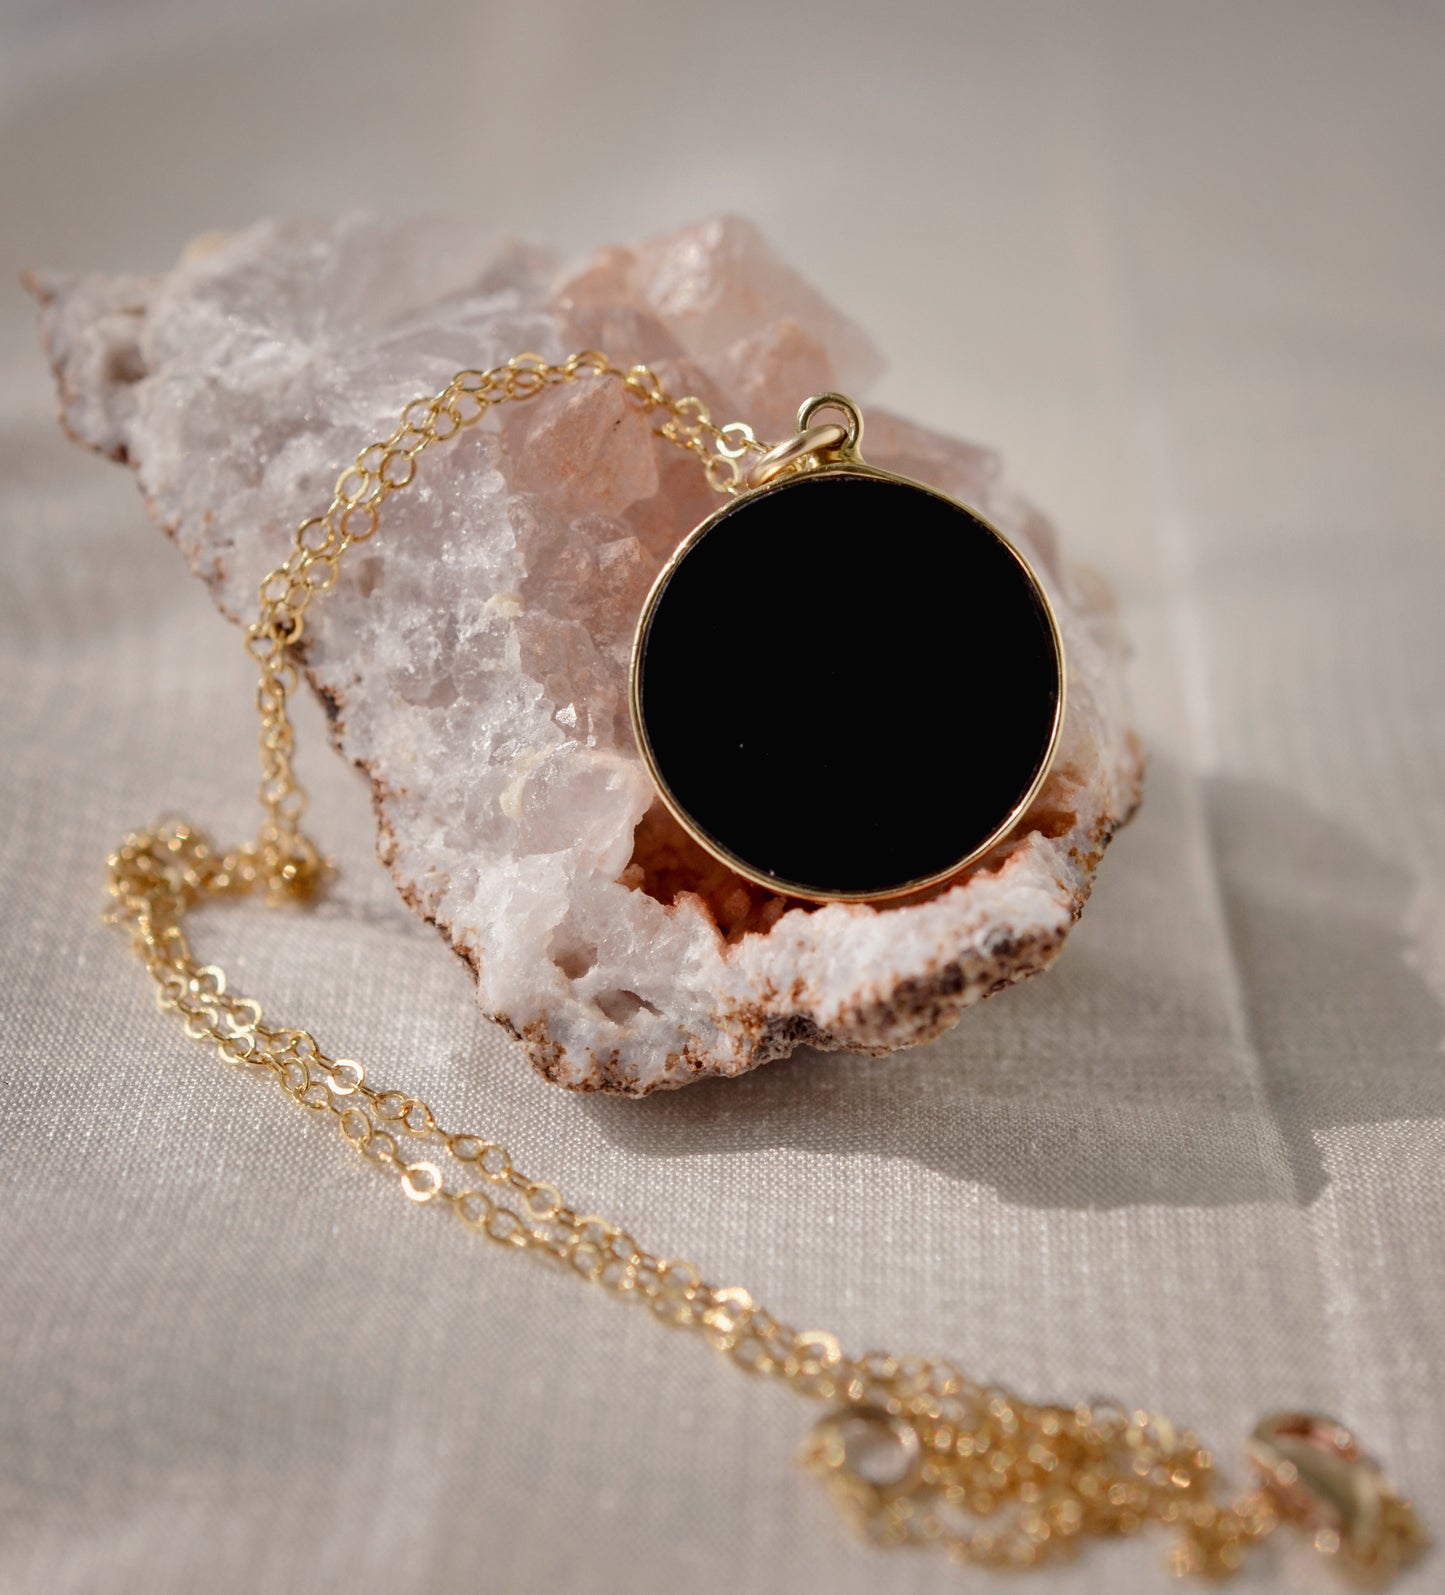 Smooth Polished Black Onyx Circle Pendant on Simple Gold Chain. 